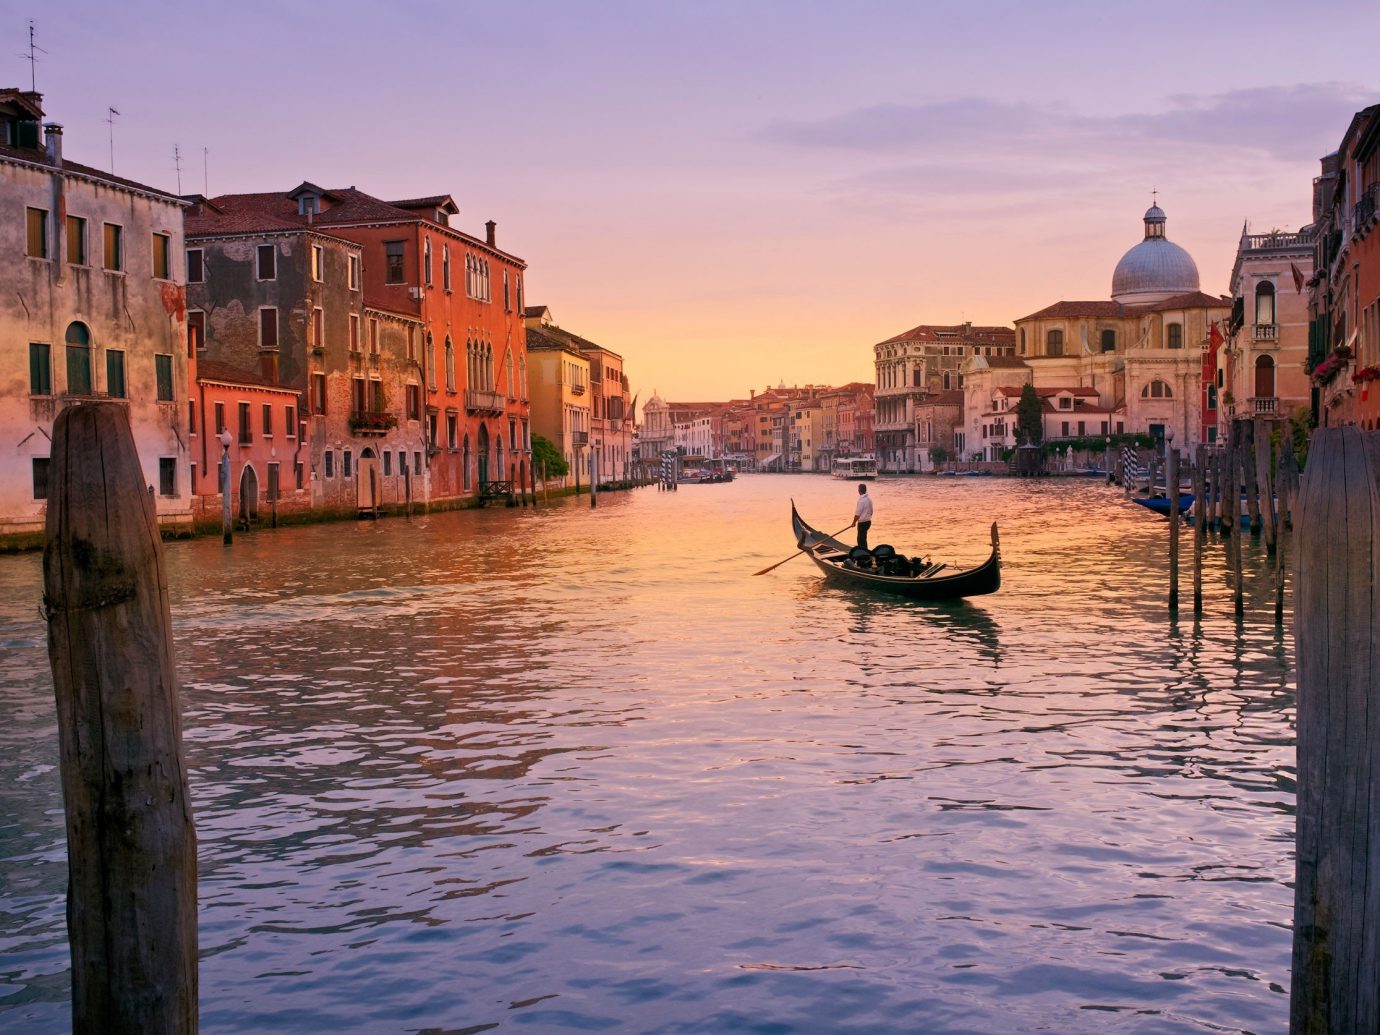 Trip Ideas outdoor sky water Boat geographical feature landform River reflection body of water Town vehicle Canal scene waterway Sea evening gondola morning Sunset channel dusk cityscape watercraft boating Harbor